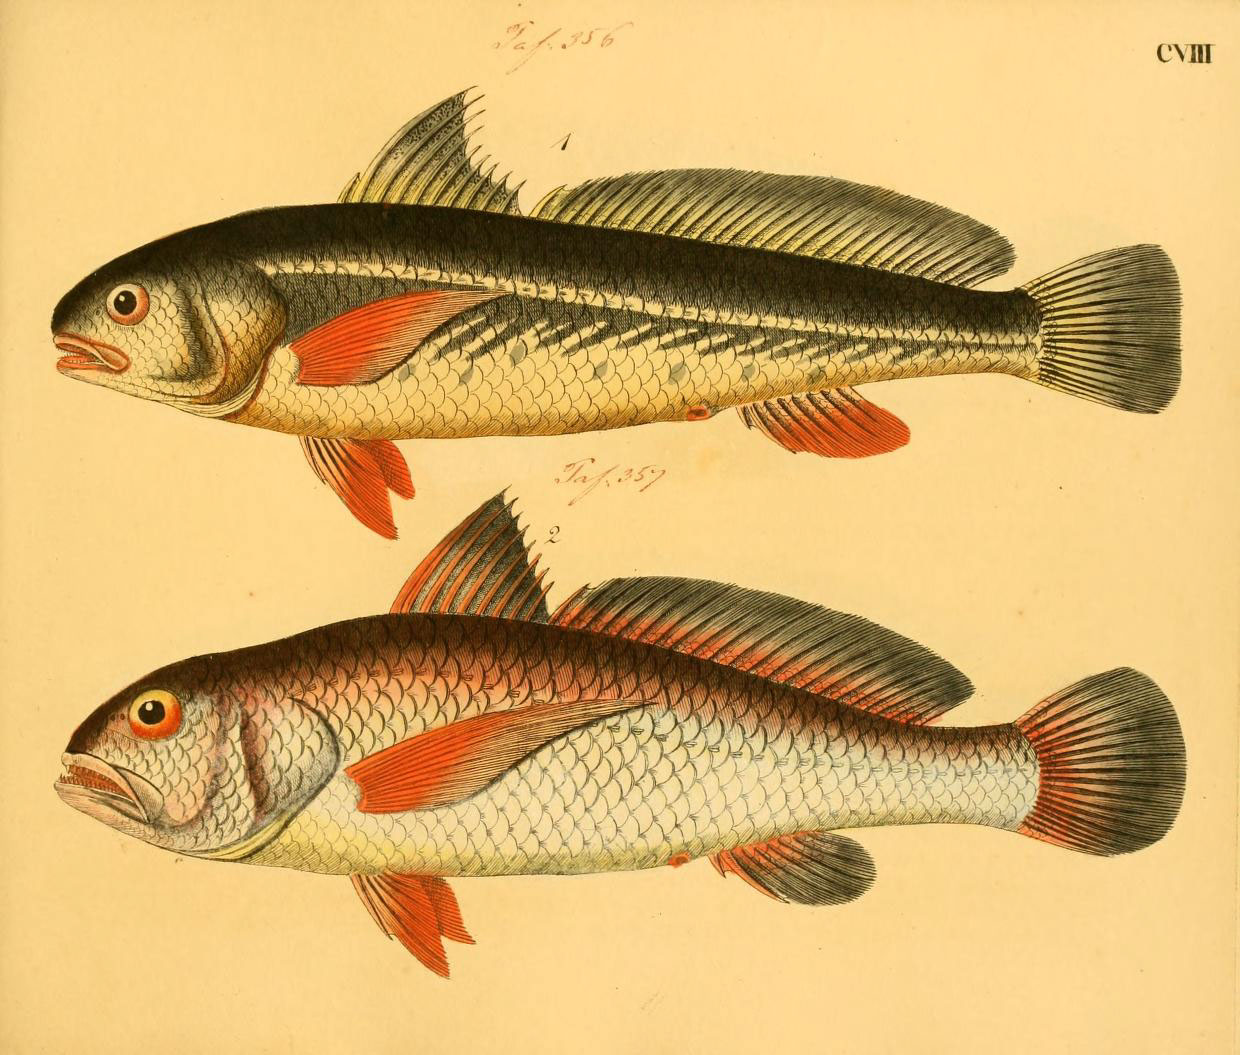 fish drawings from an early 19th century lithog book